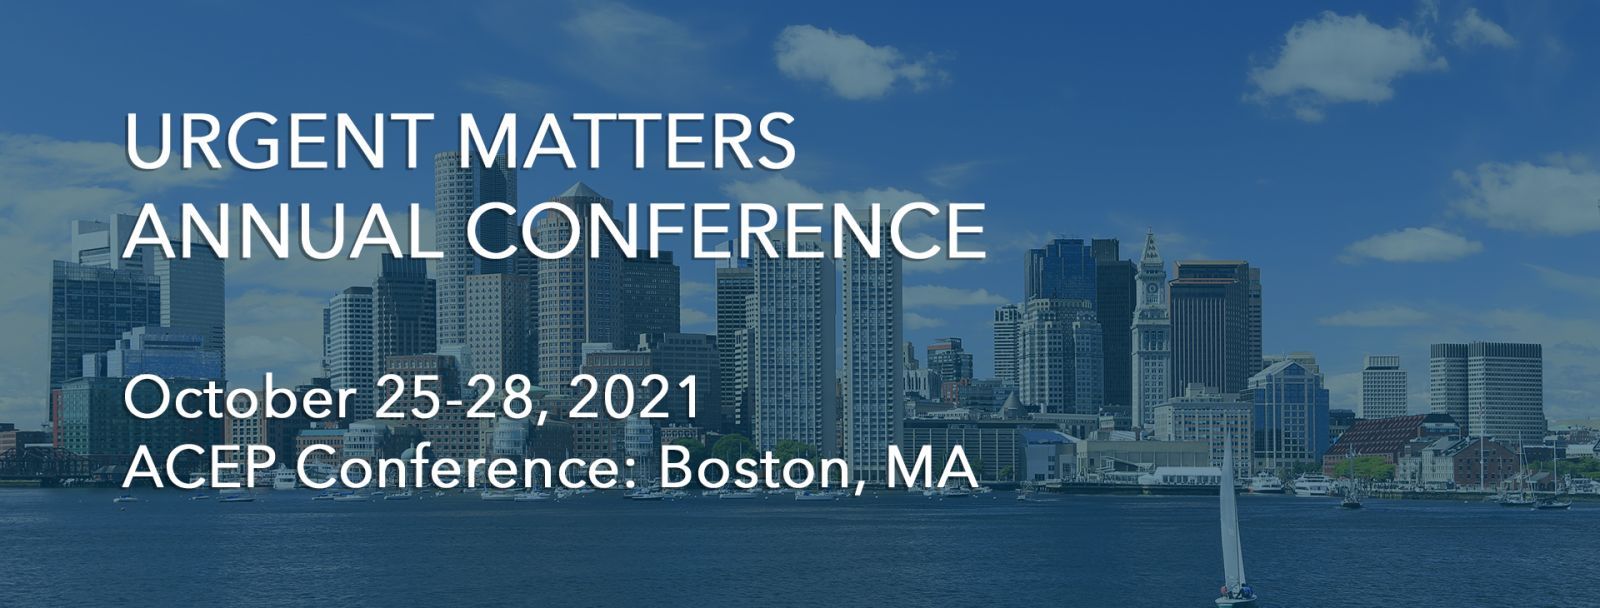 Urgent Matters Annual Conference - October 25-28, 2021; ACEP Conference: Boston, MA